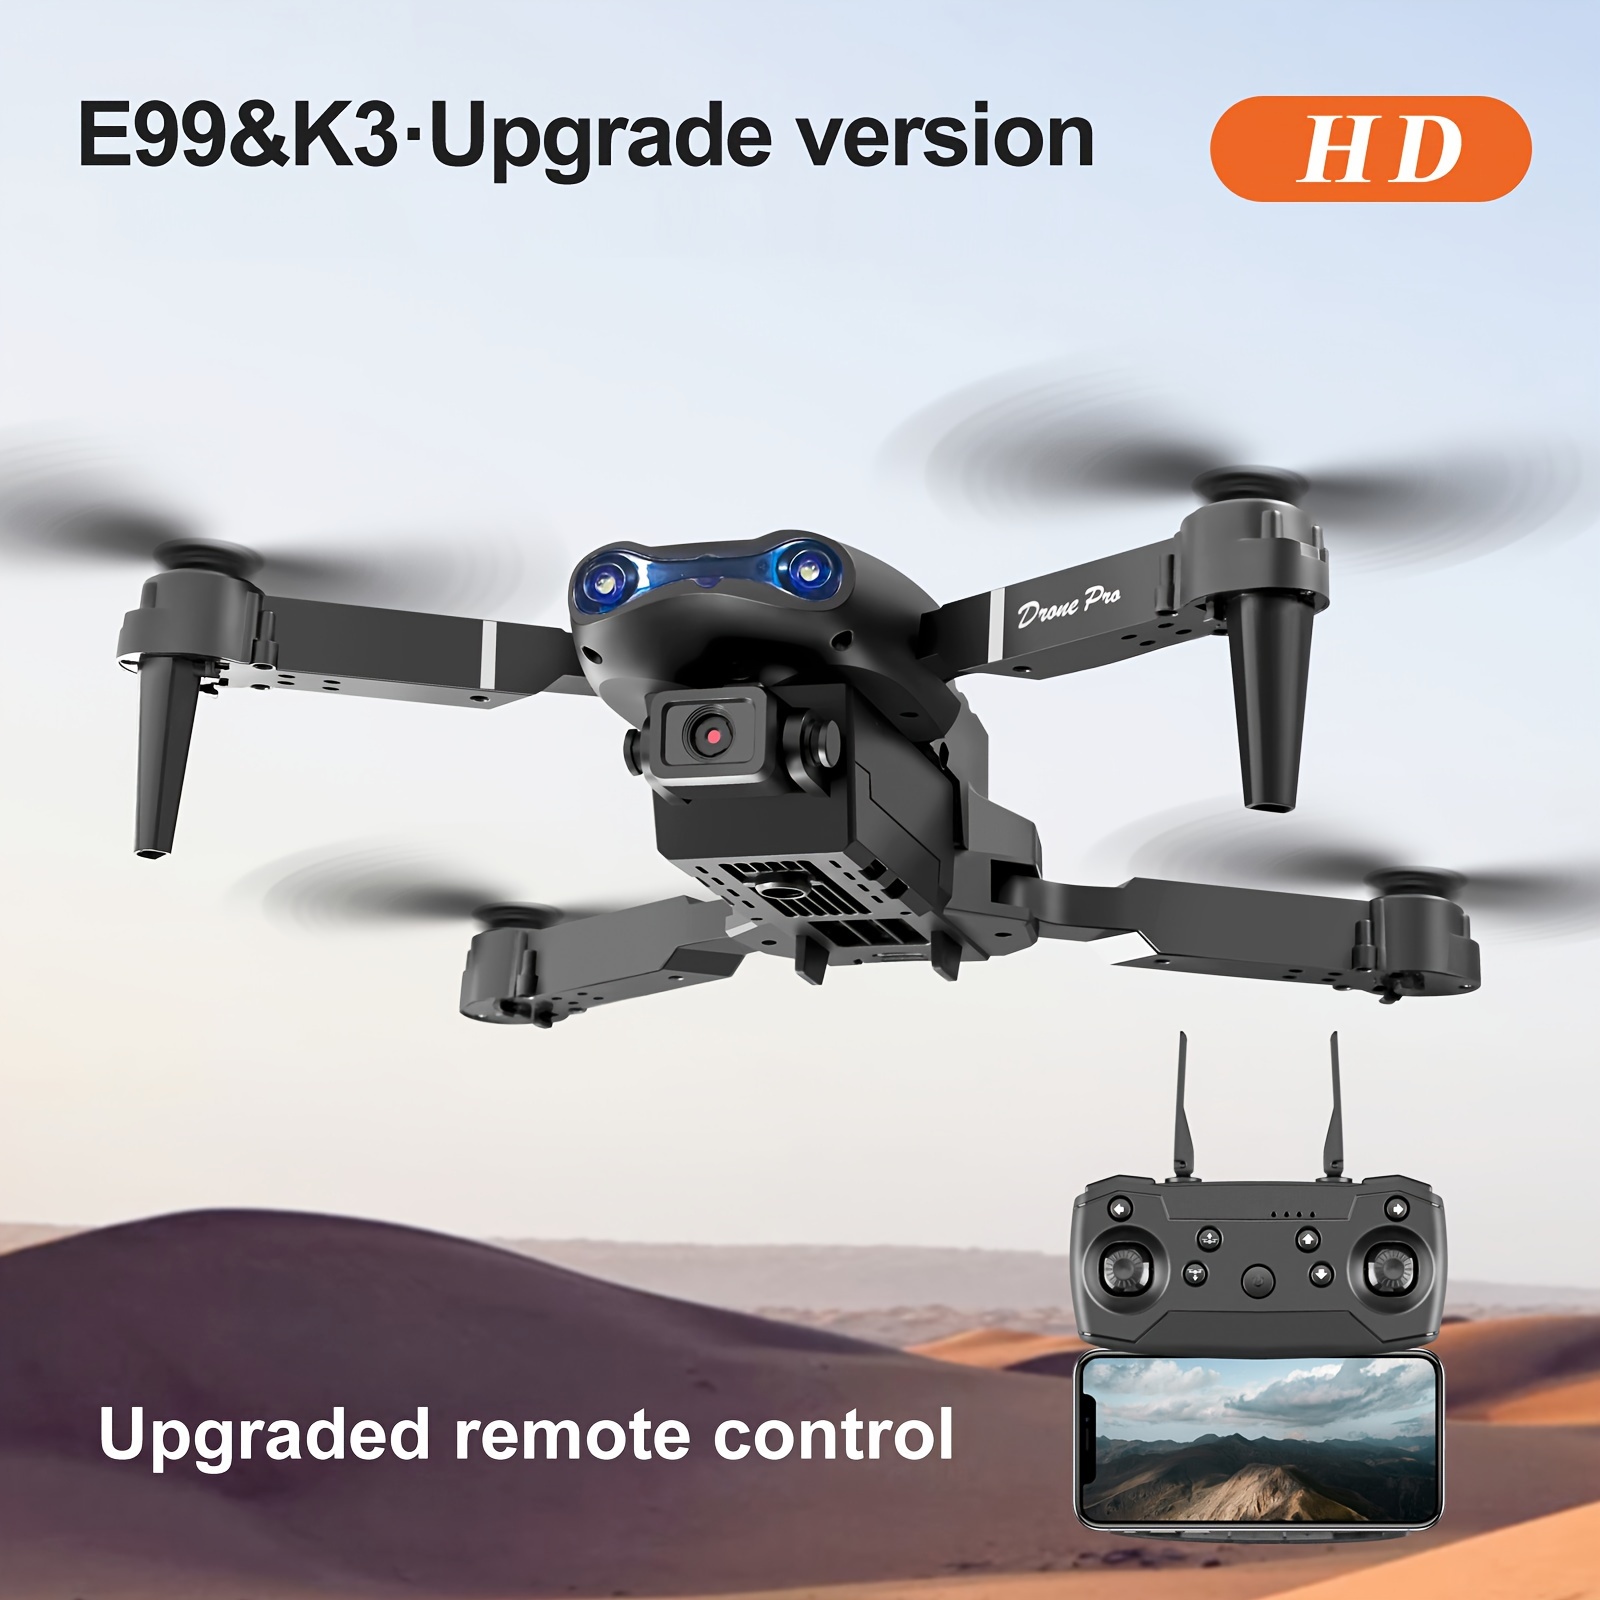 new e99 quadcopter drone with hd camera one key takeoff and landing altitude hold 360 stunt rolling supports wifi connection to mobile app foldable design suitable for beginners christmas gift details 1